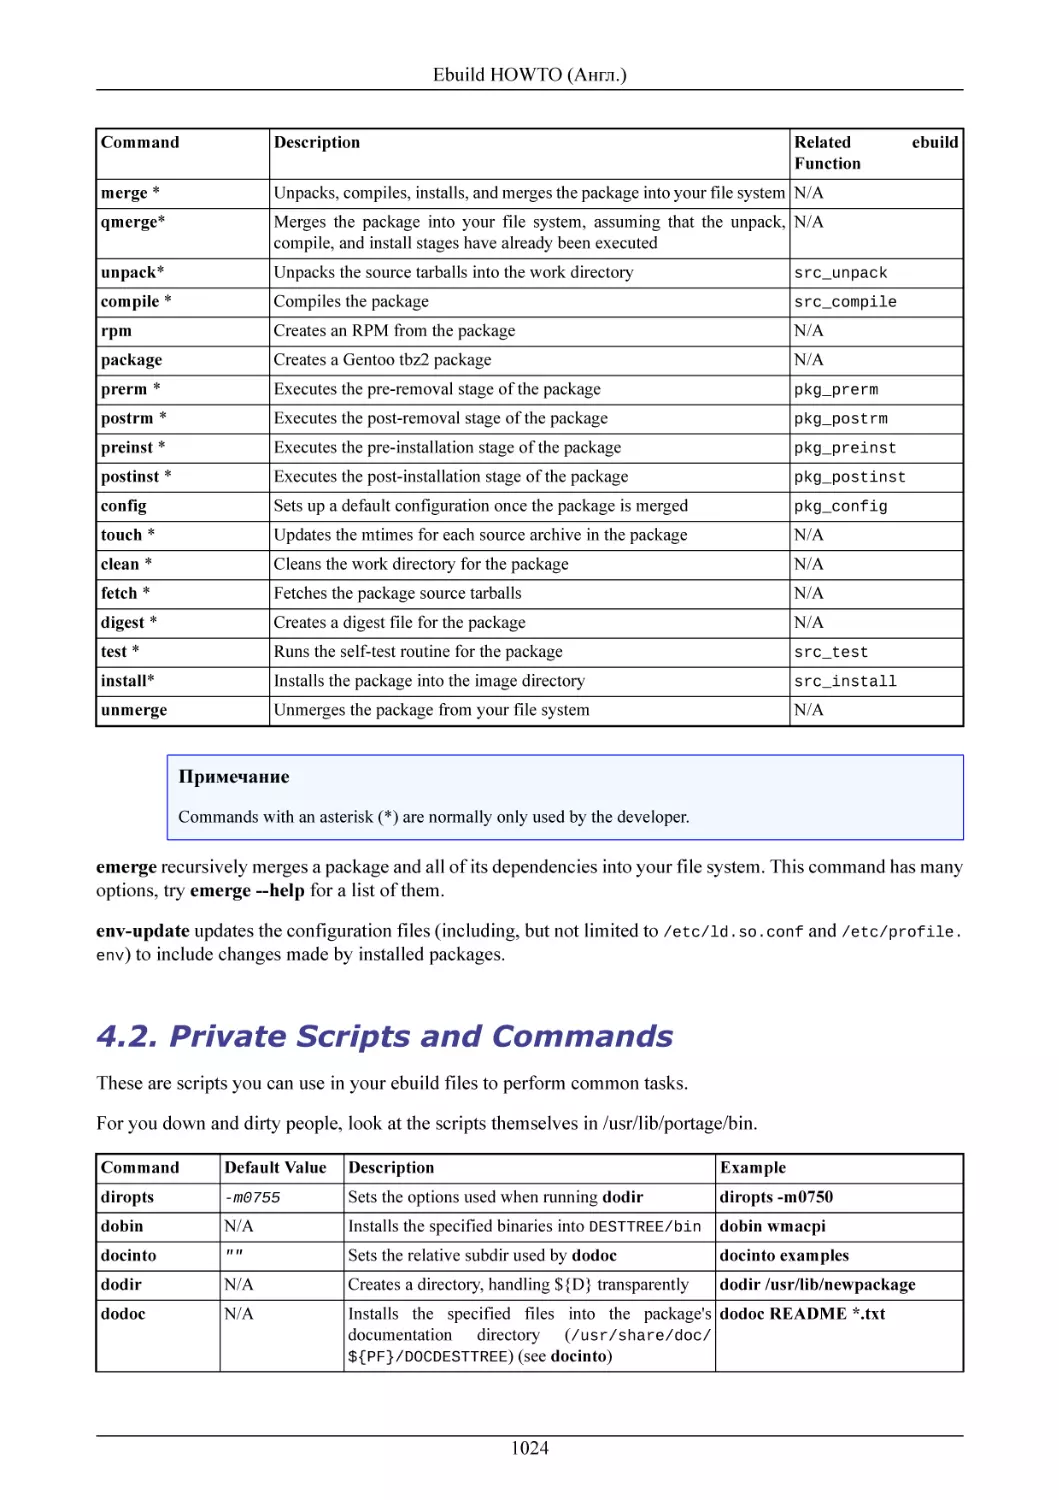 Private Scripts and Commands